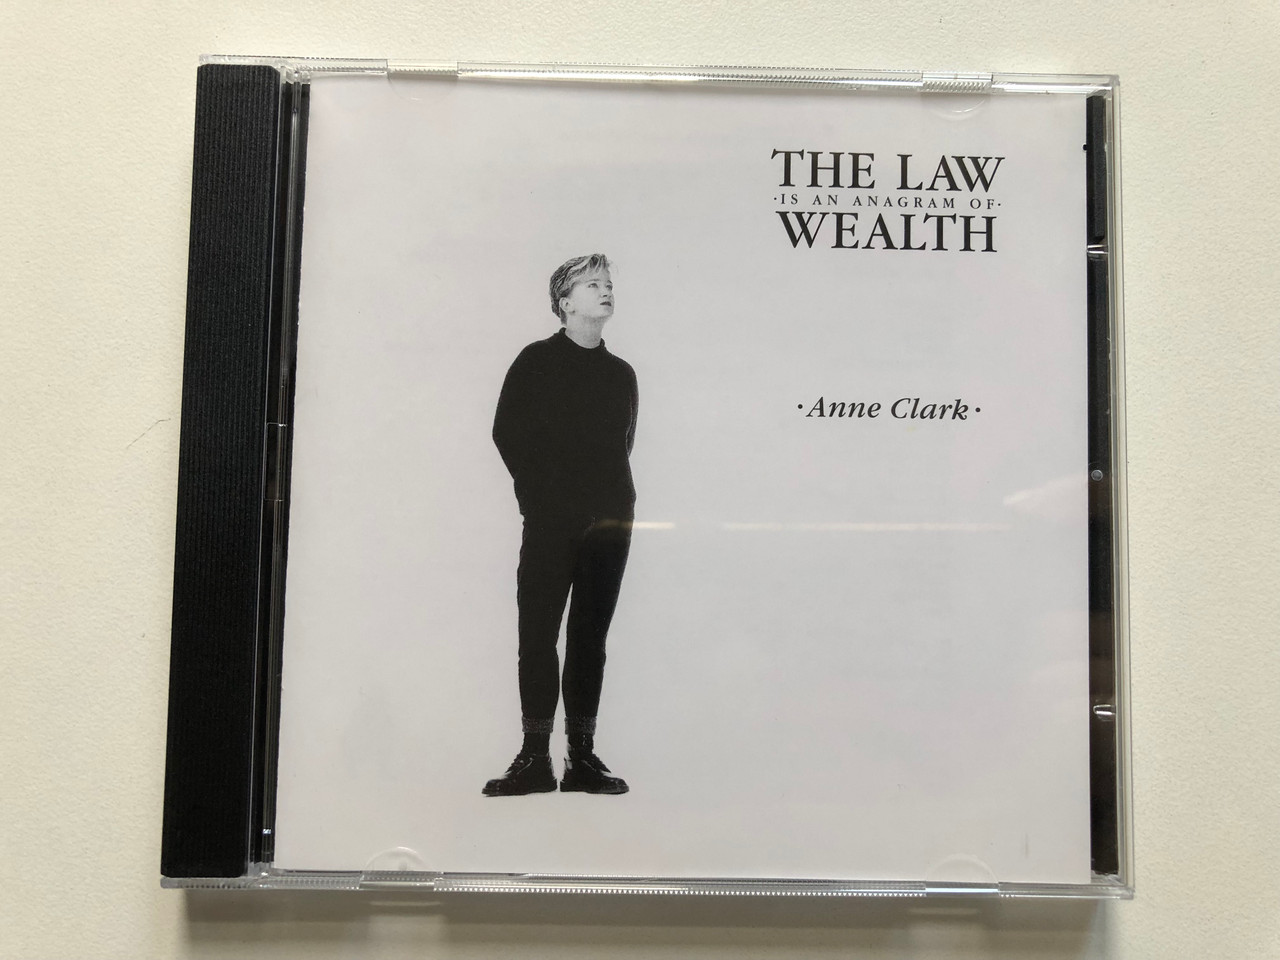 https://cdn10.bigcommerce.com/s-62bdpkt7pb/products/0/images/307659/The_Law_Is_An_Anagram_Of_Wealth_-_Anne_Clark_SPV_Records_Audio_CD_1993_SPV_084-92702_1__90916.1698813640.1280.1280.JPG?c=2